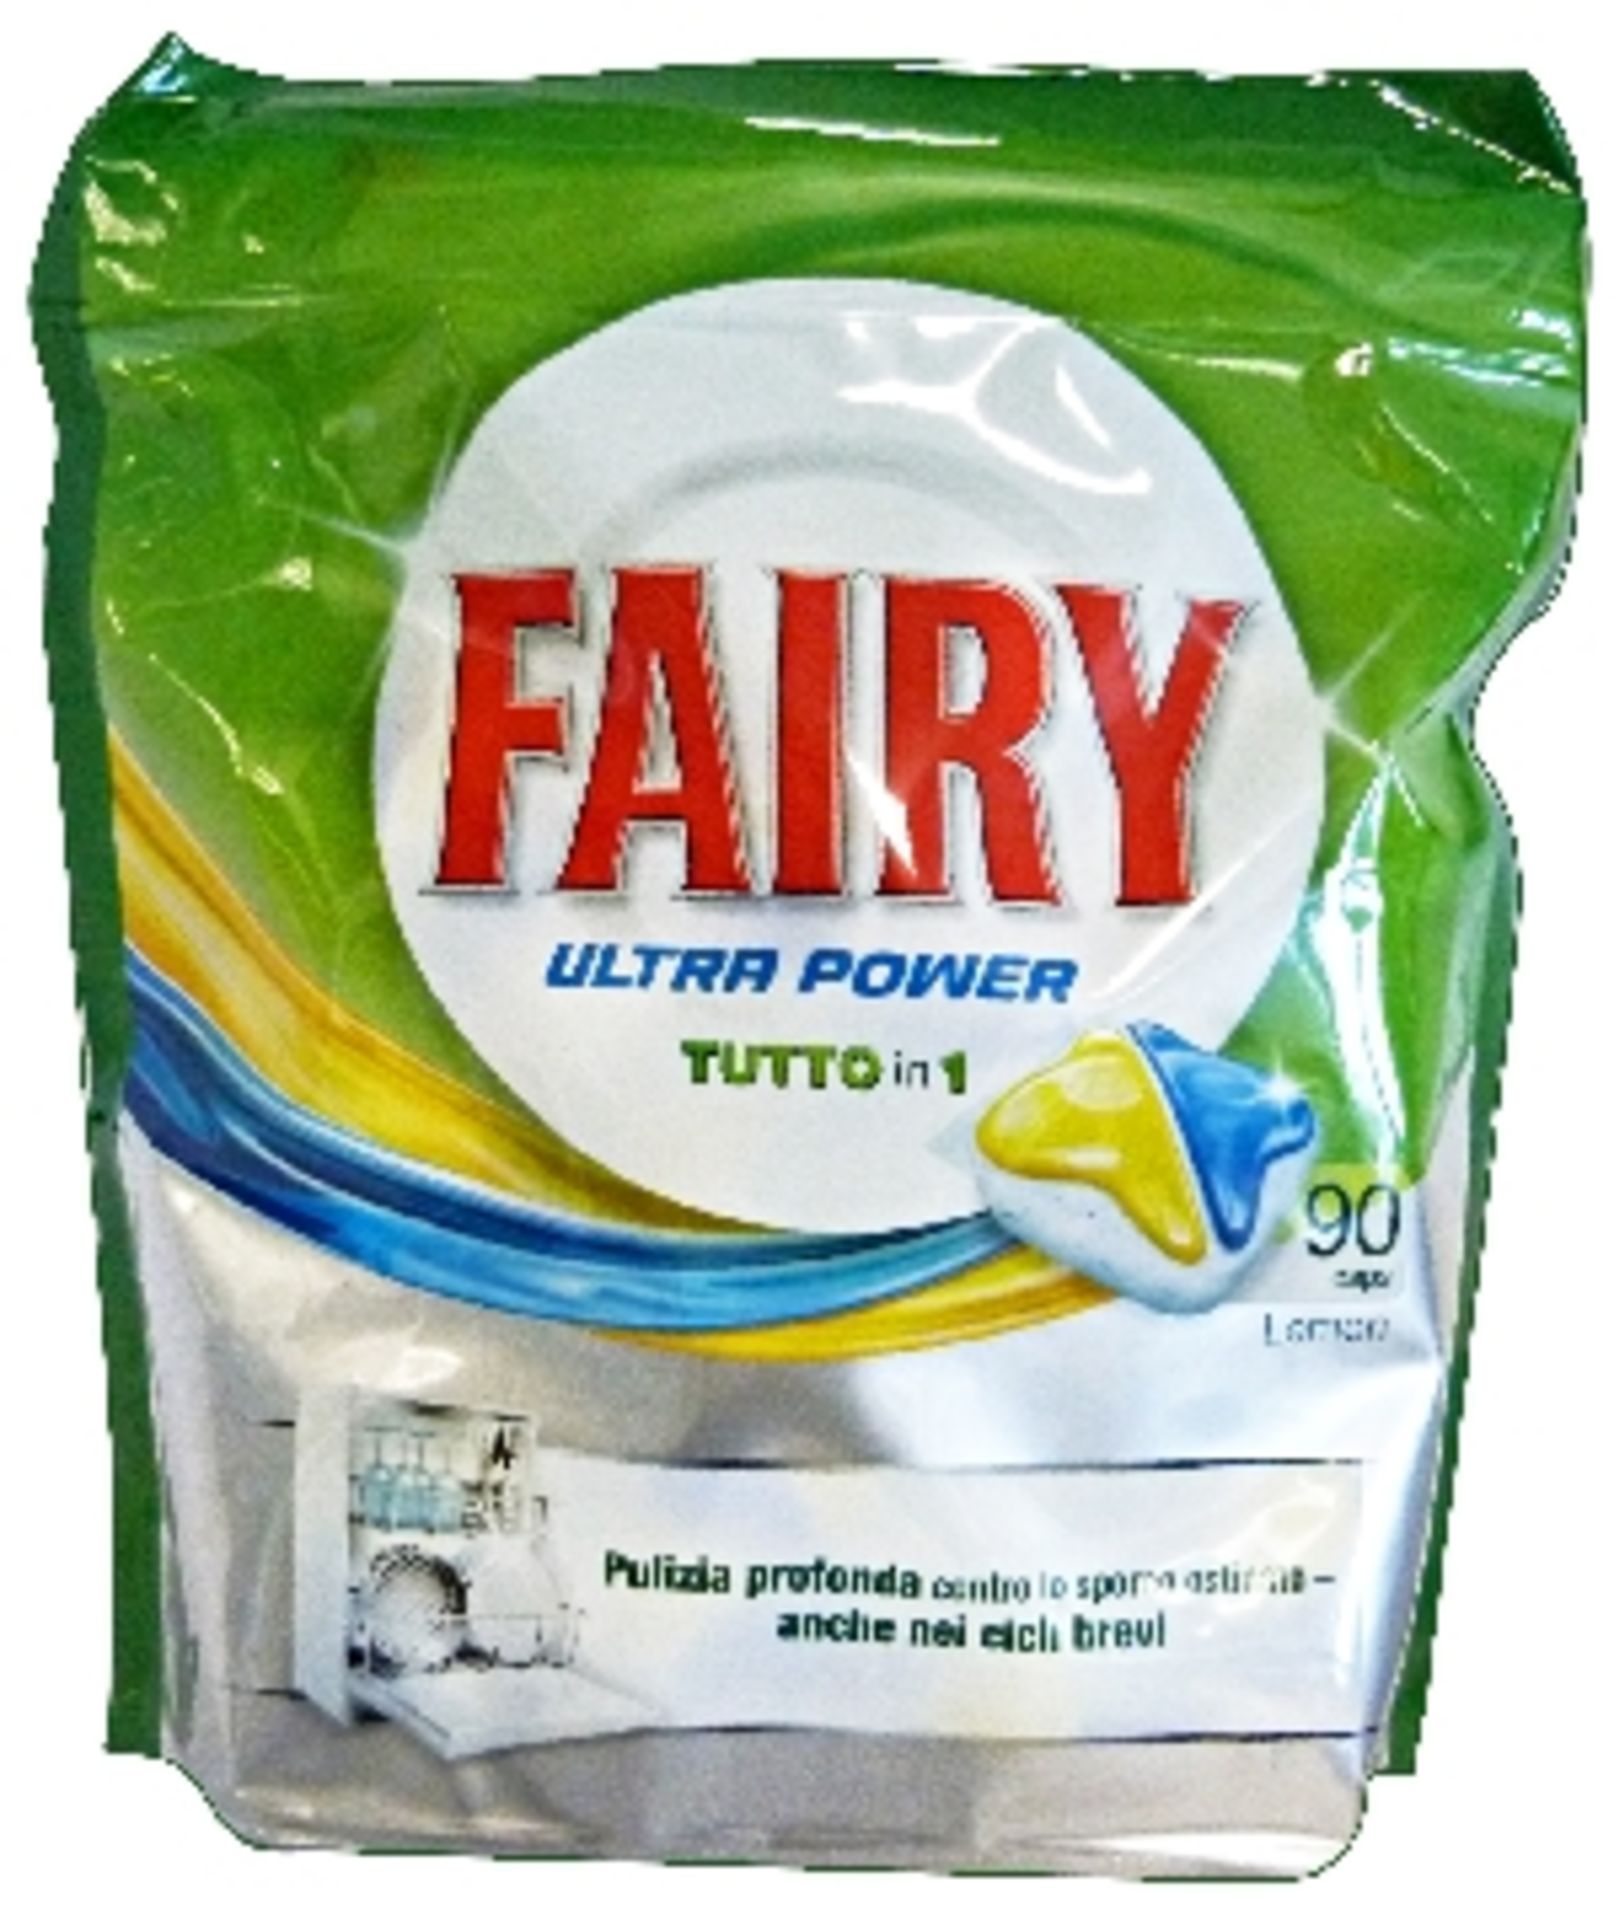 V *TRADE QTY* Brand New Fairy Ultra Power All-In-One Lemon Dishwasher Tablets 90 Pack ISP£14.99 X 24